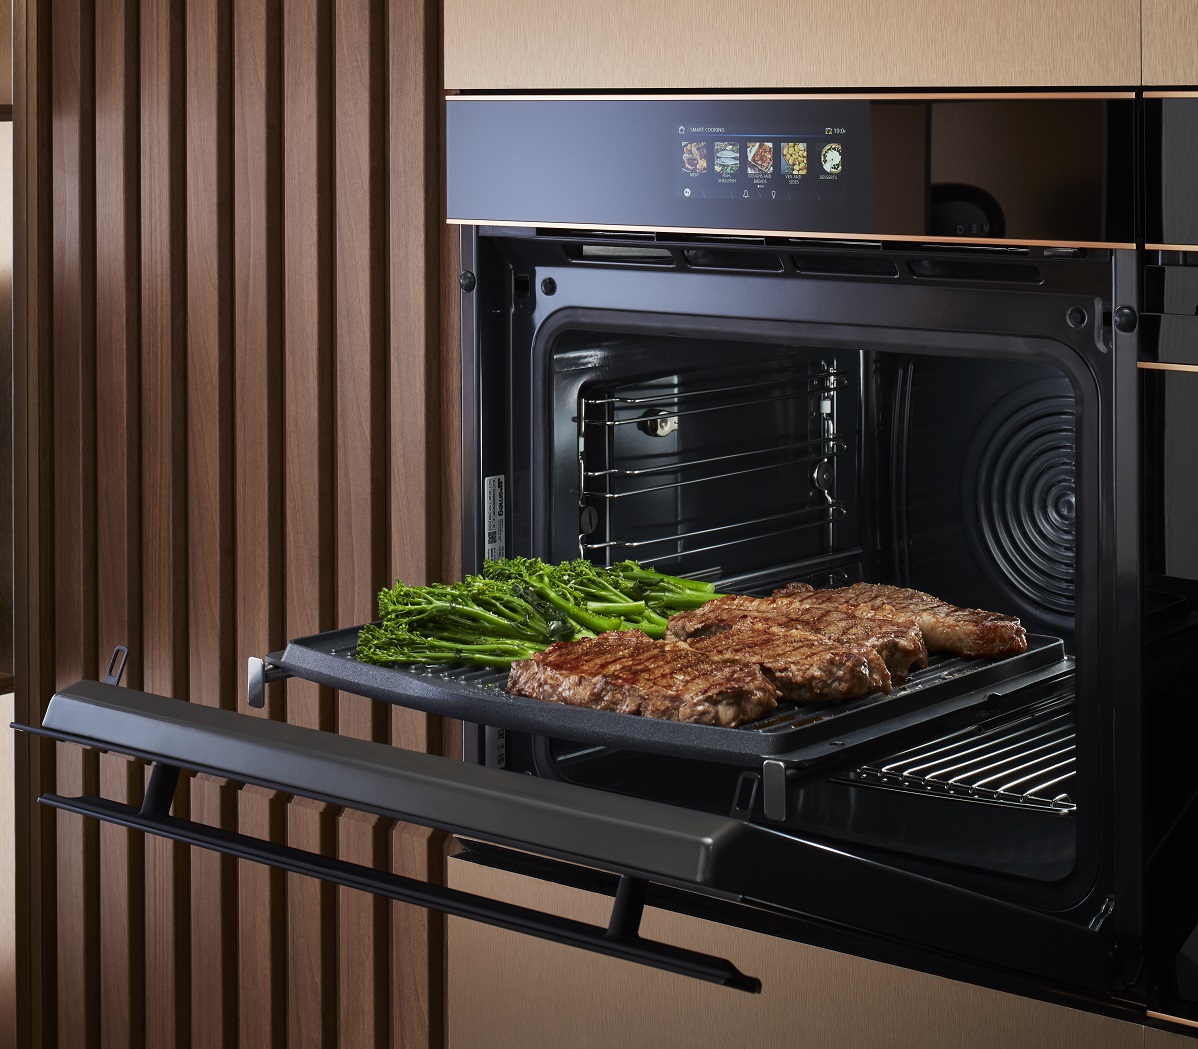 https://www.applianceretailer.com.au/wp-content/uploads/Smeg-Galileo-OmniChefOven-BarbecueTray-SteakBroccolini-WithFoodCooked-Hero-D-0298.jpg